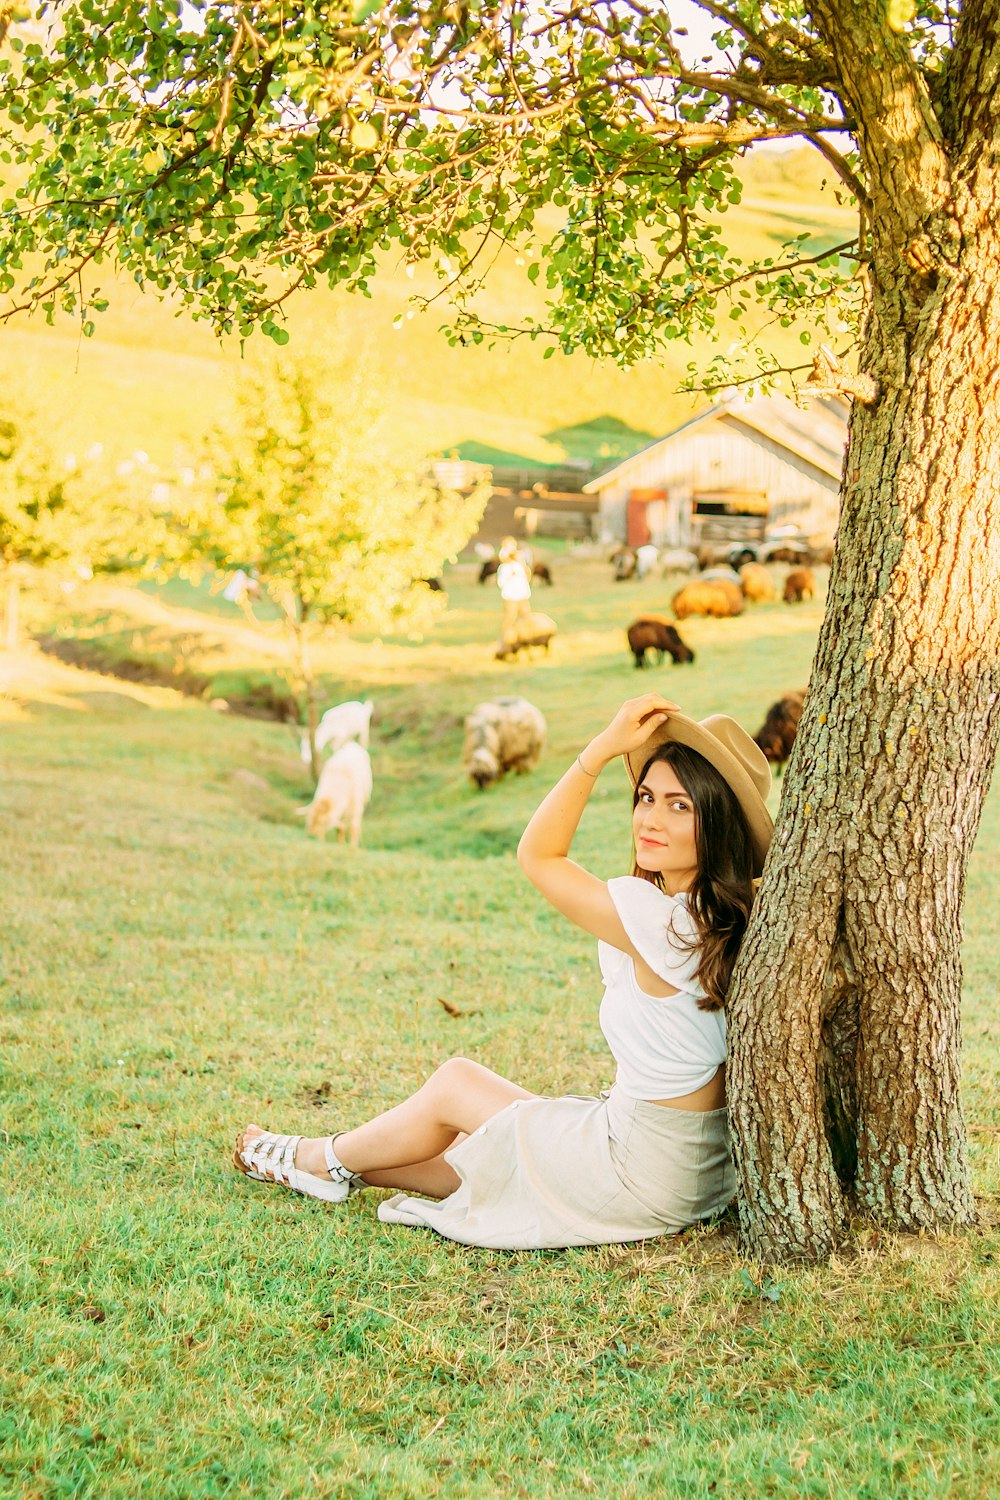 woman in white dress lying on green grass field beside brown and white short coated small